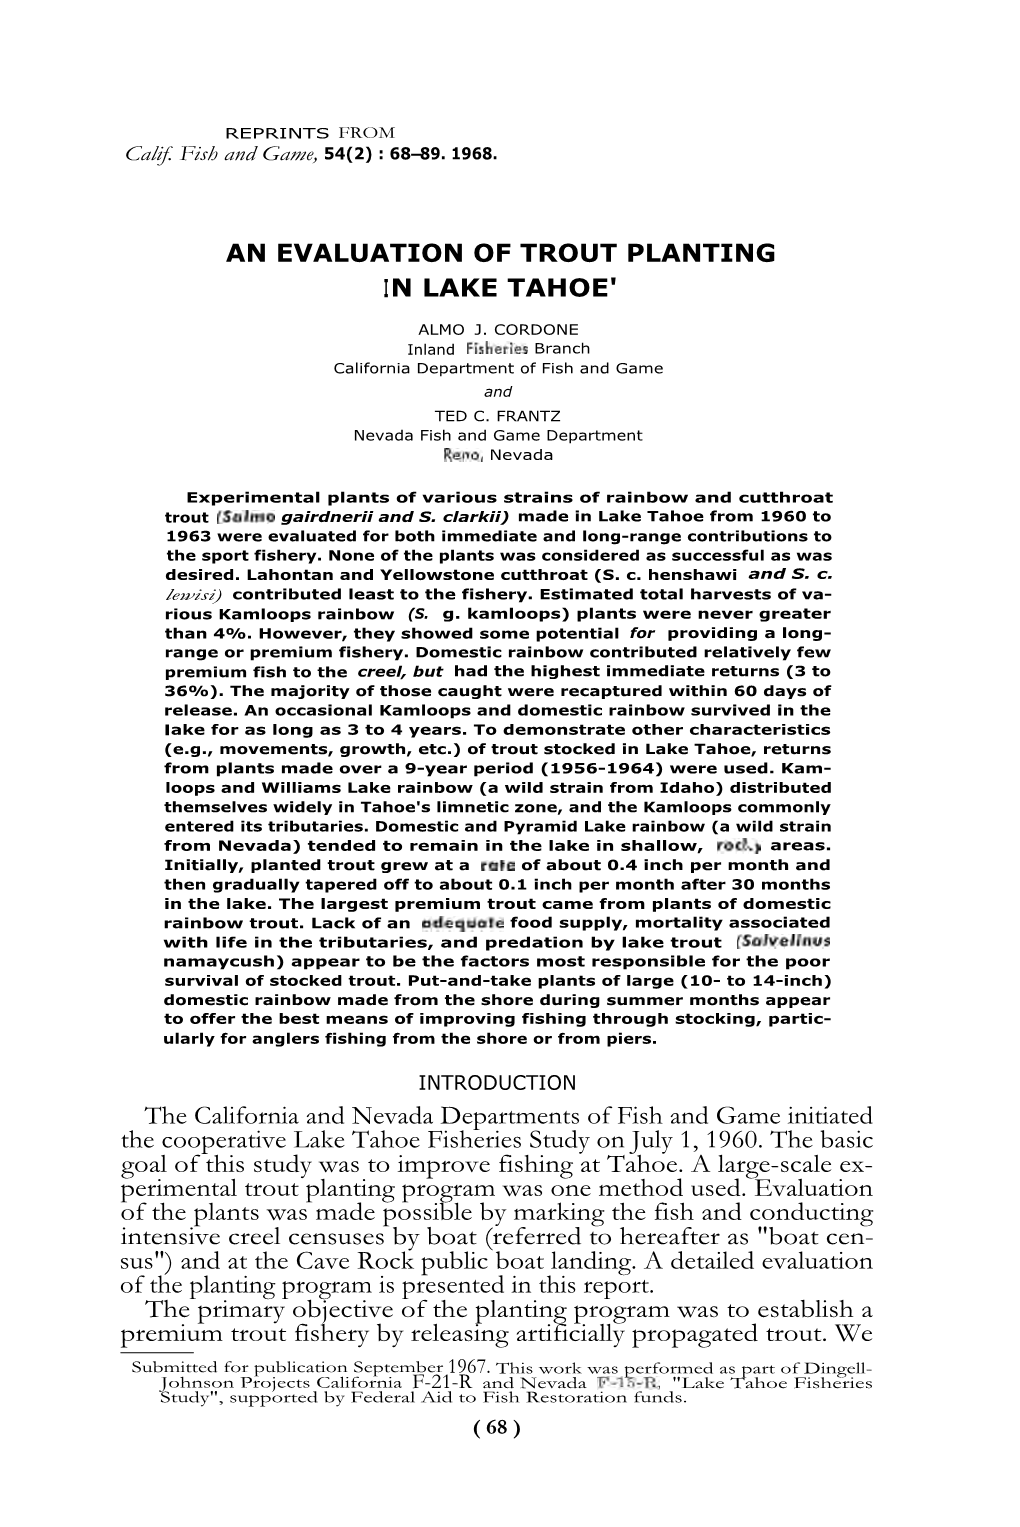 The California and Nevada Departments of Fish and Game Initiated the Cooperative Lake Tahoe Fisheries Study on July 1, 1960